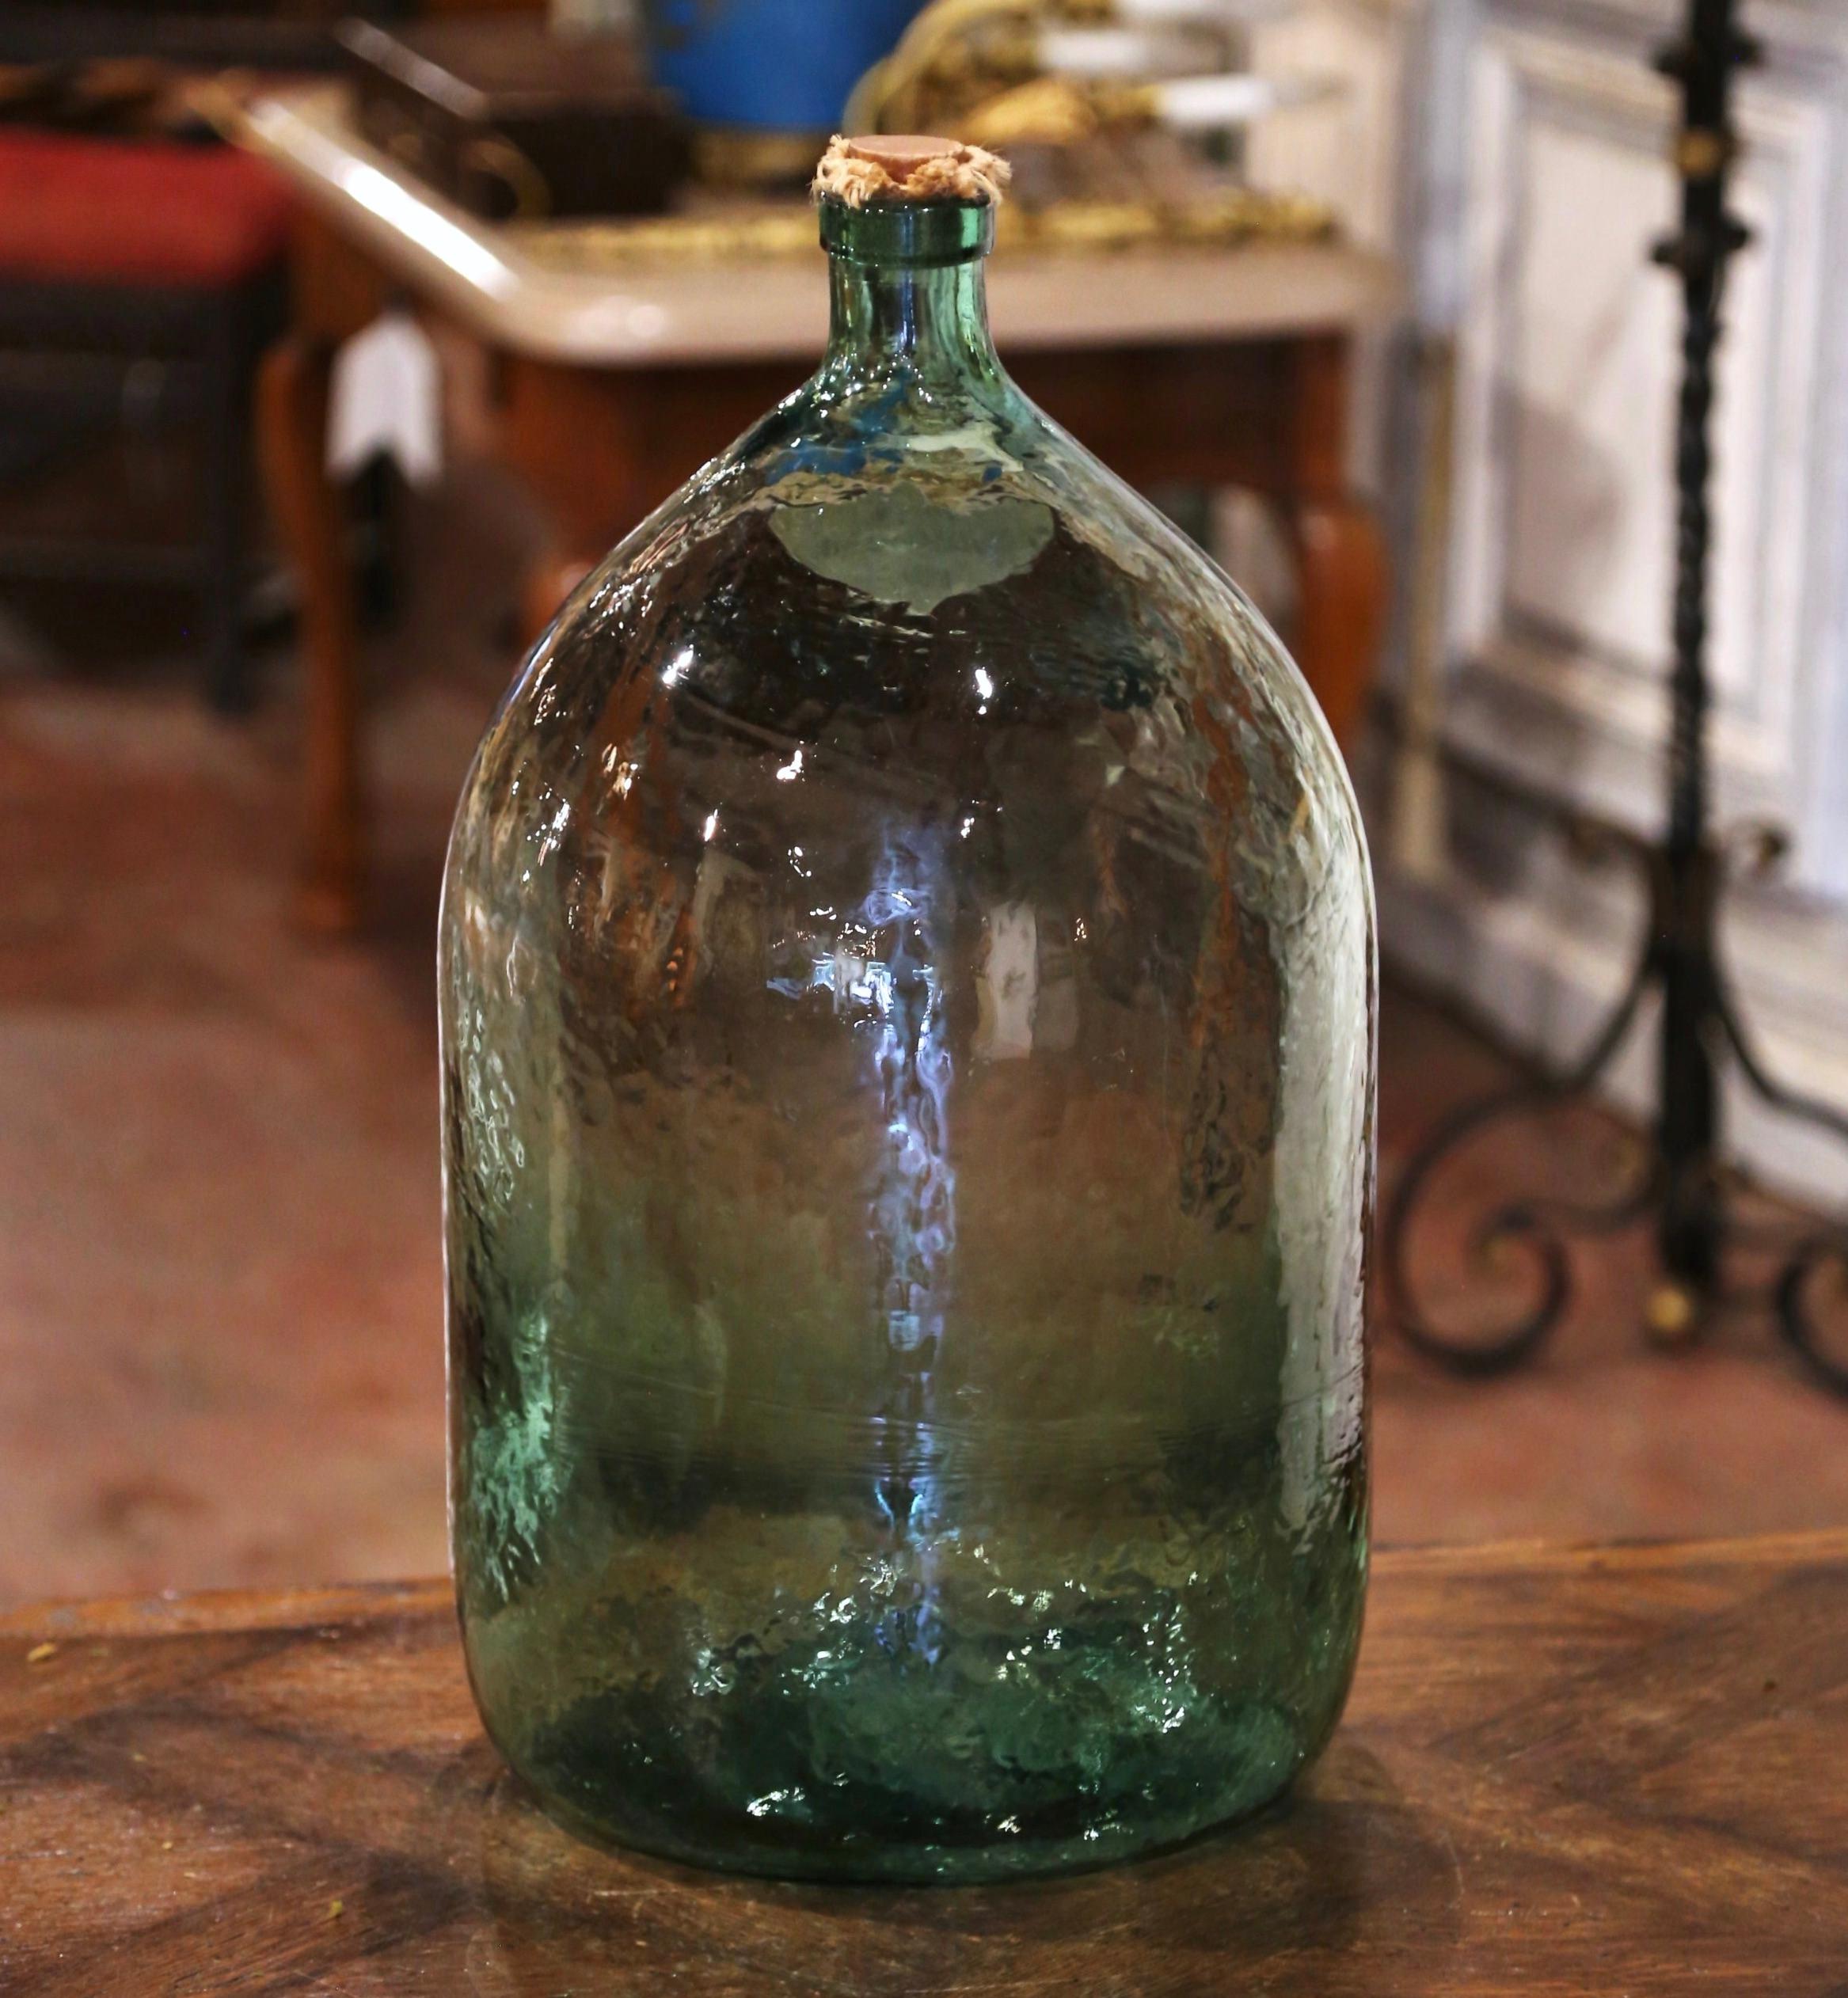 Vintage French Hand Blown Demijohn Glass Bottle with Cork Top 1